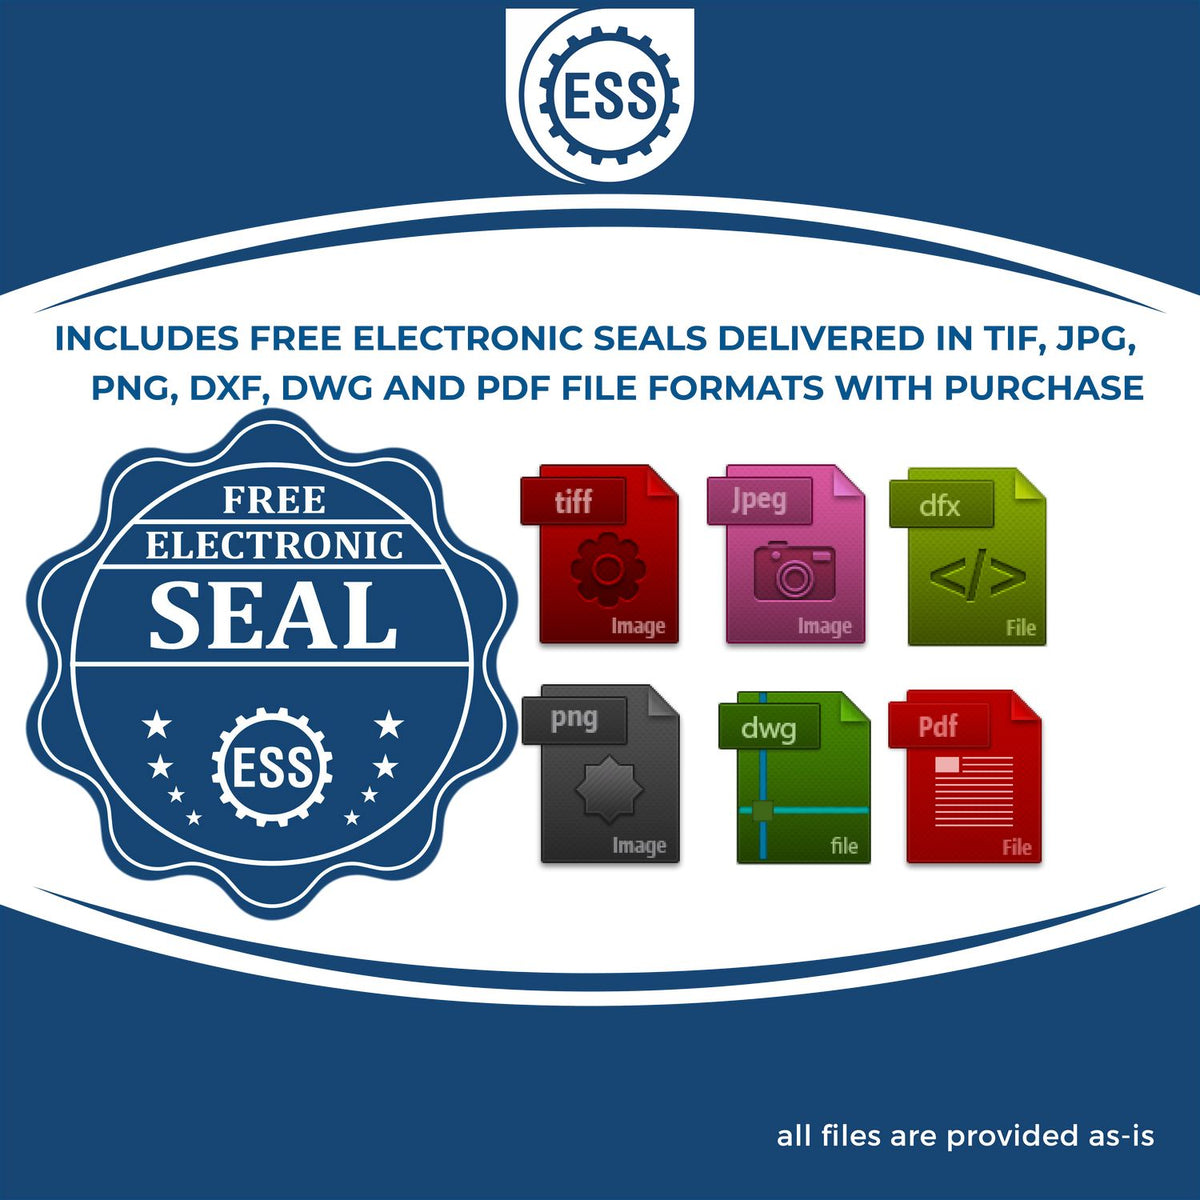 An infographic for the free electronic seal for the Hybrid Massachusetts Landscape Architect Seal illustrating the different file type icons such as DXF, DWG, TIF, JPG and PNG.